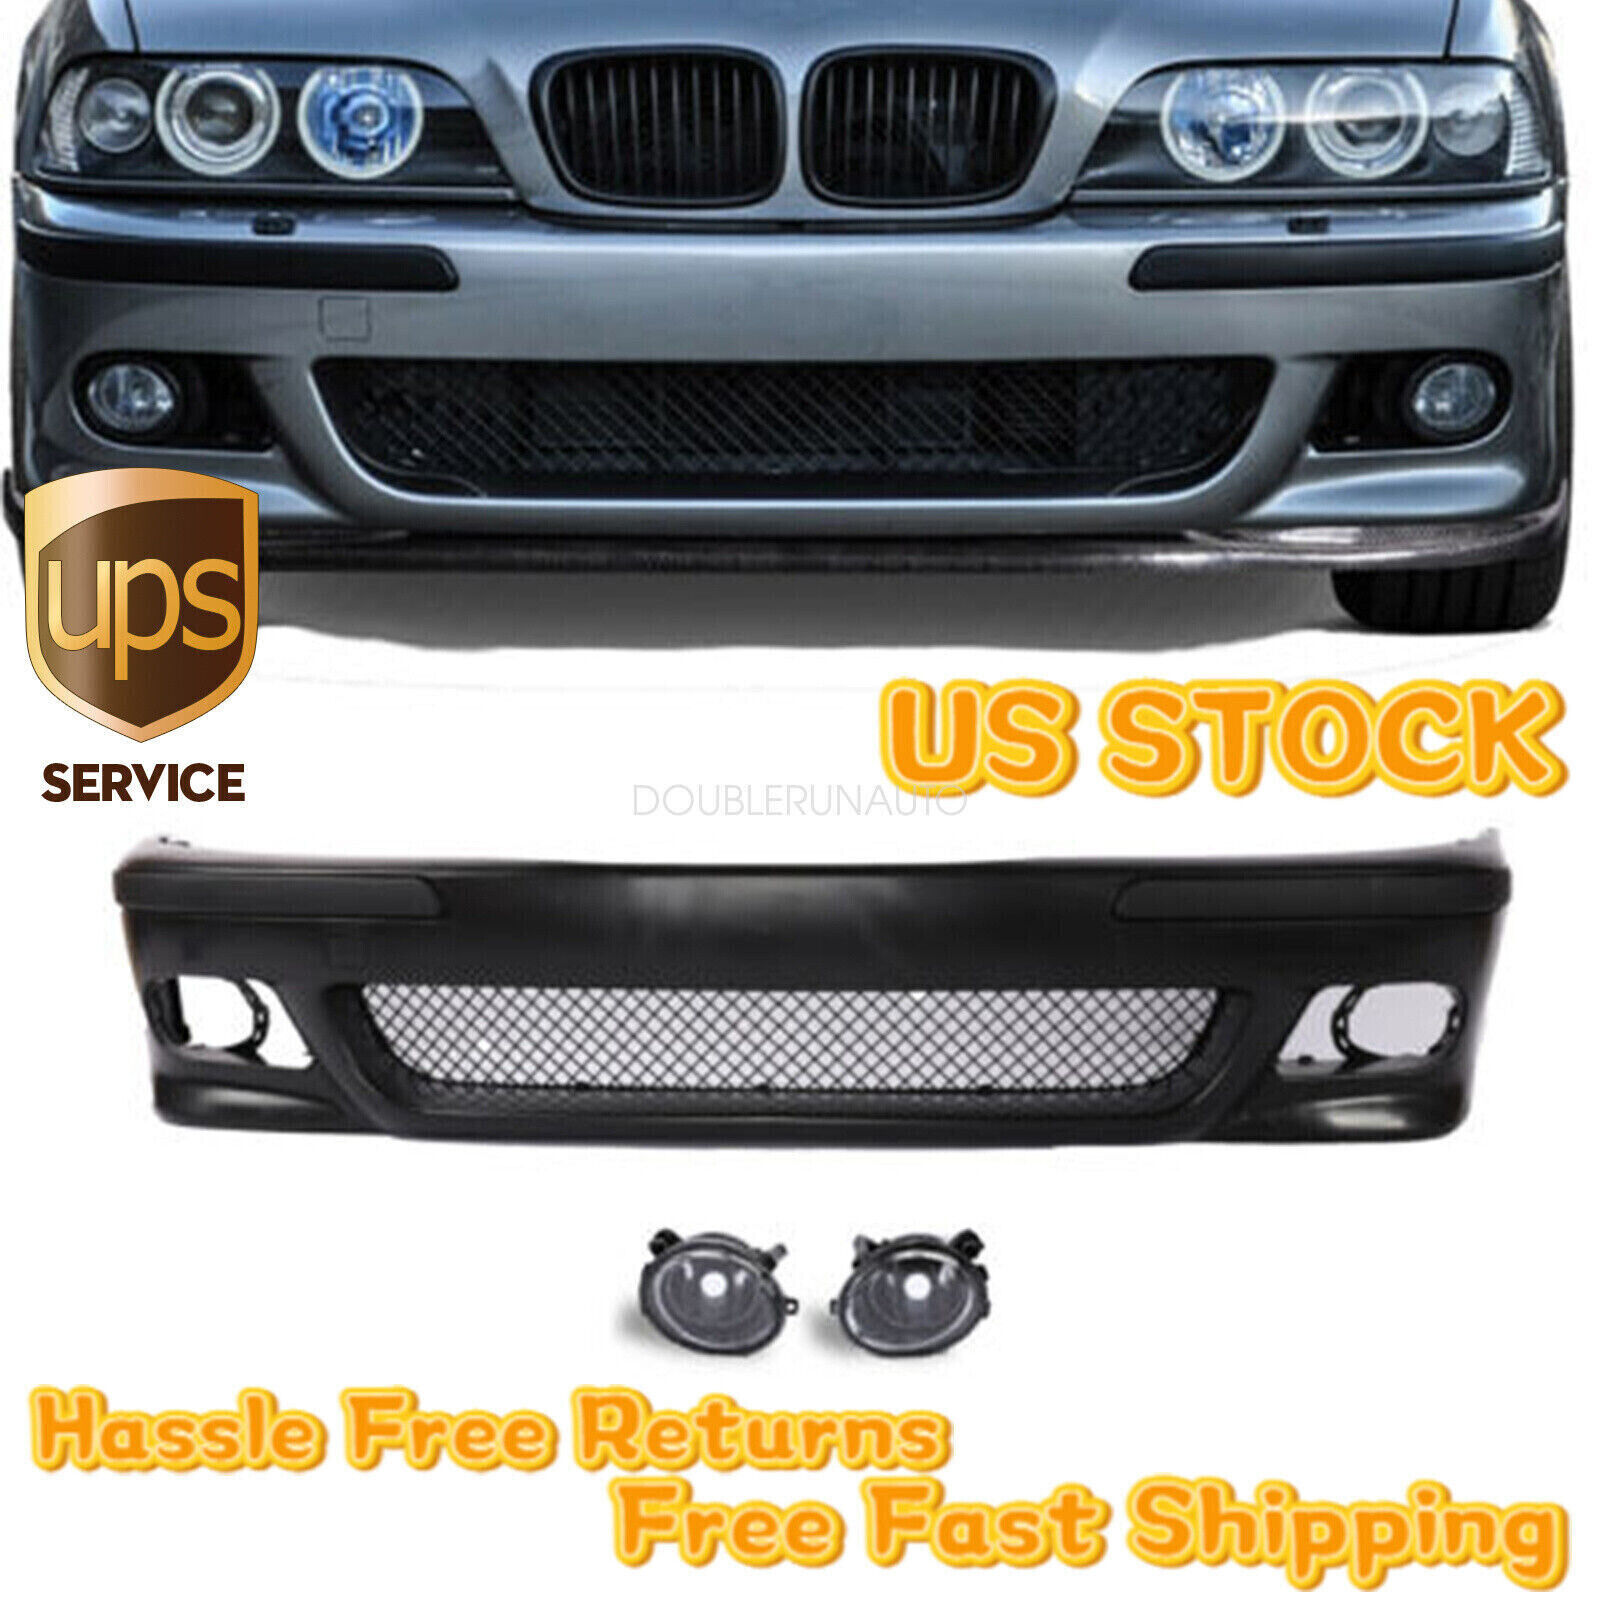 Fit 96-03 BMW E39 5Series M5 Look Replacement Front Bumper Cover Body +Fog Light